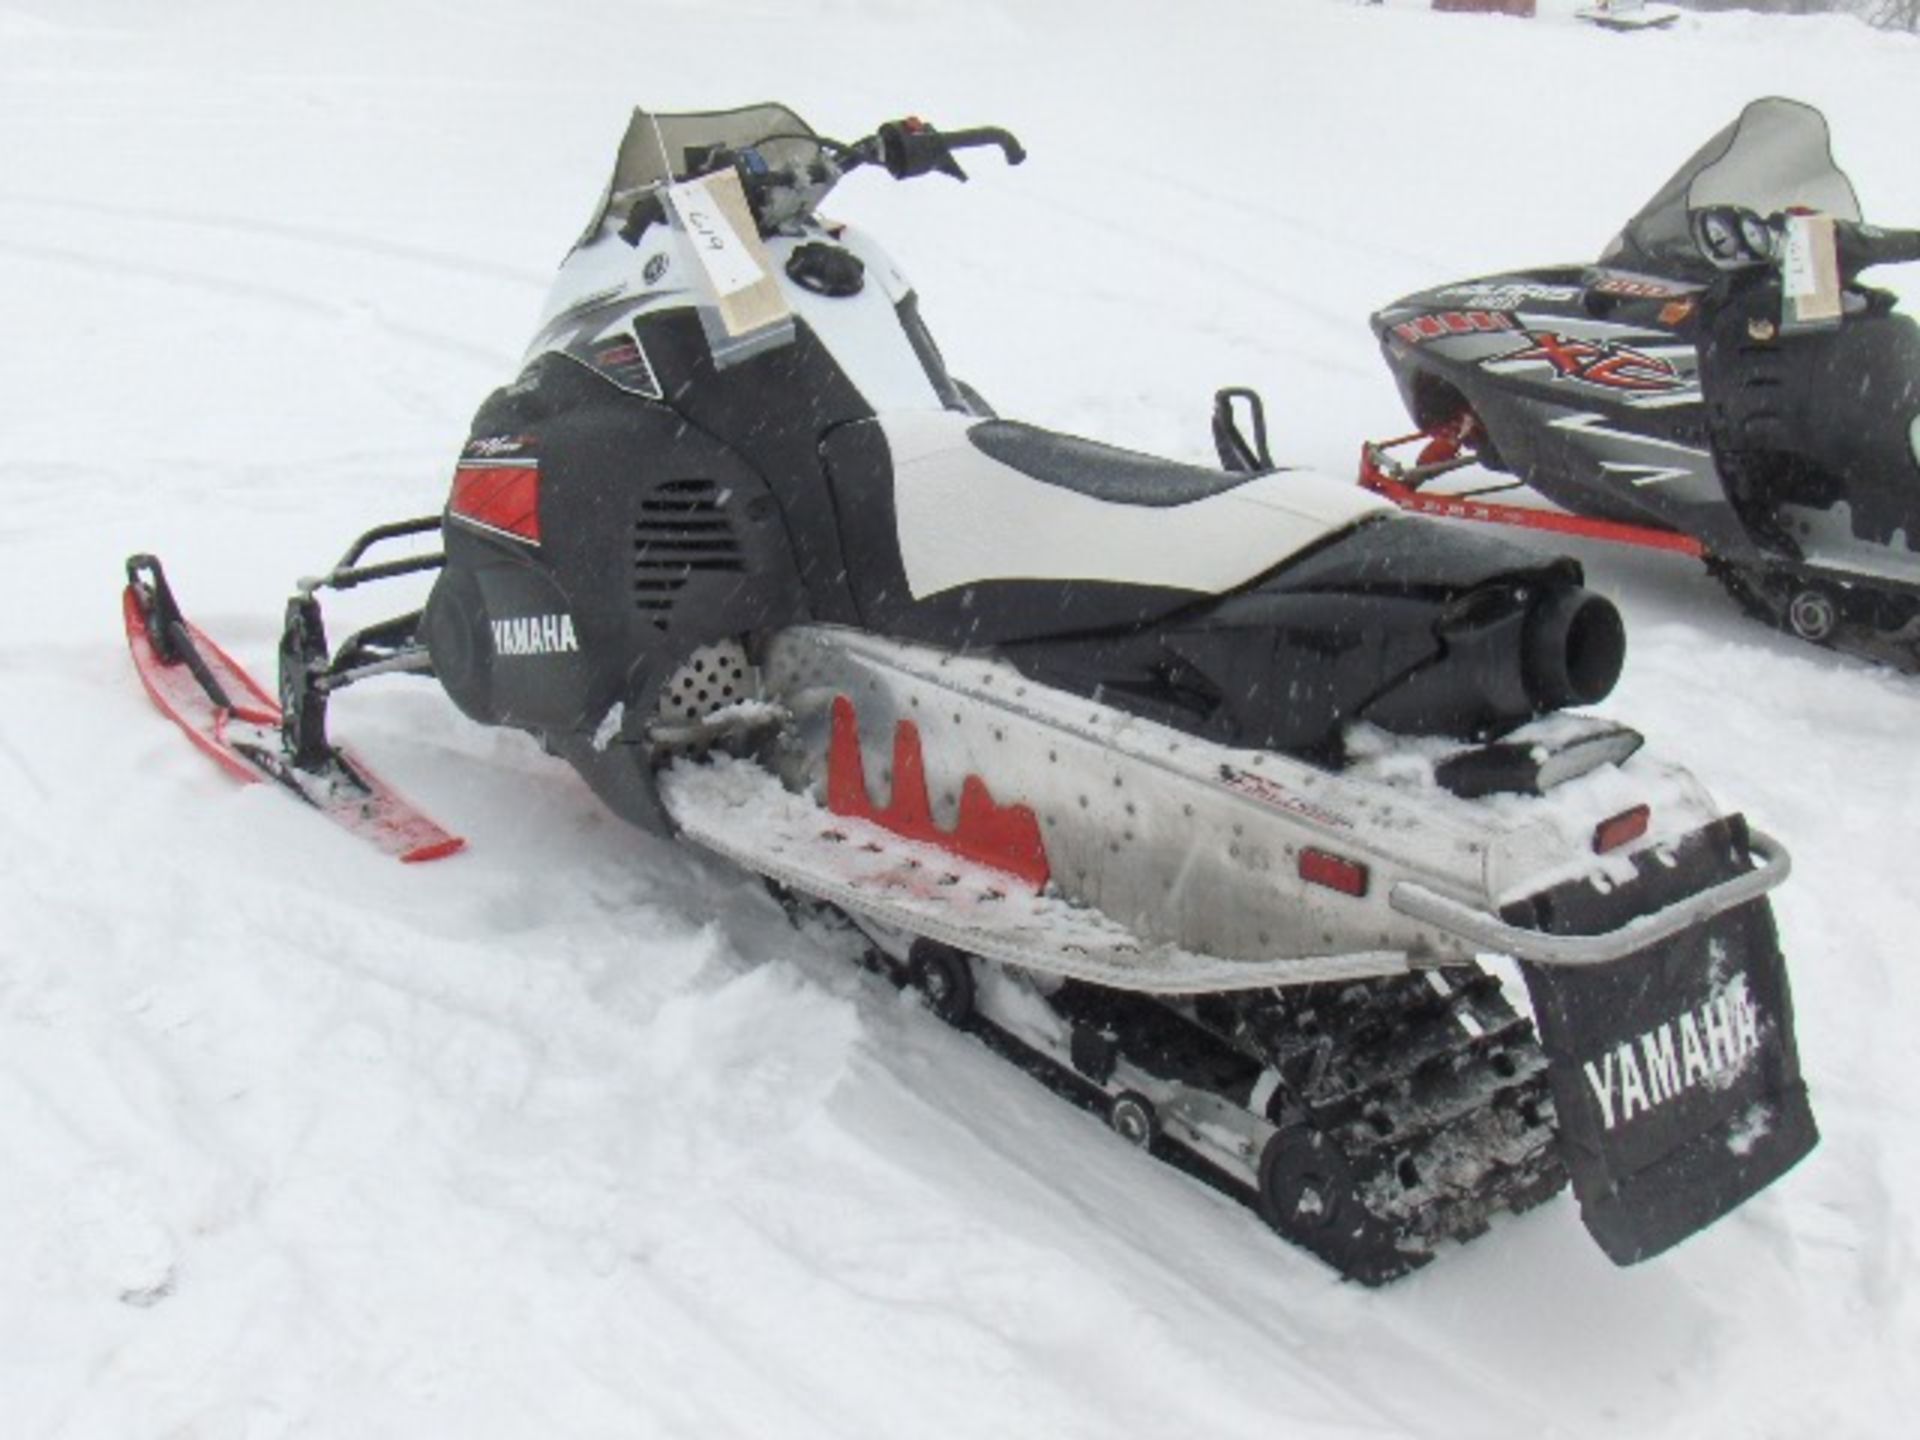 2008 YAMAHA 1049 FX NYTRO R TX  JYE8HB0088A002134 snowmobile, owner started at time of auction check - Image 4 of 4